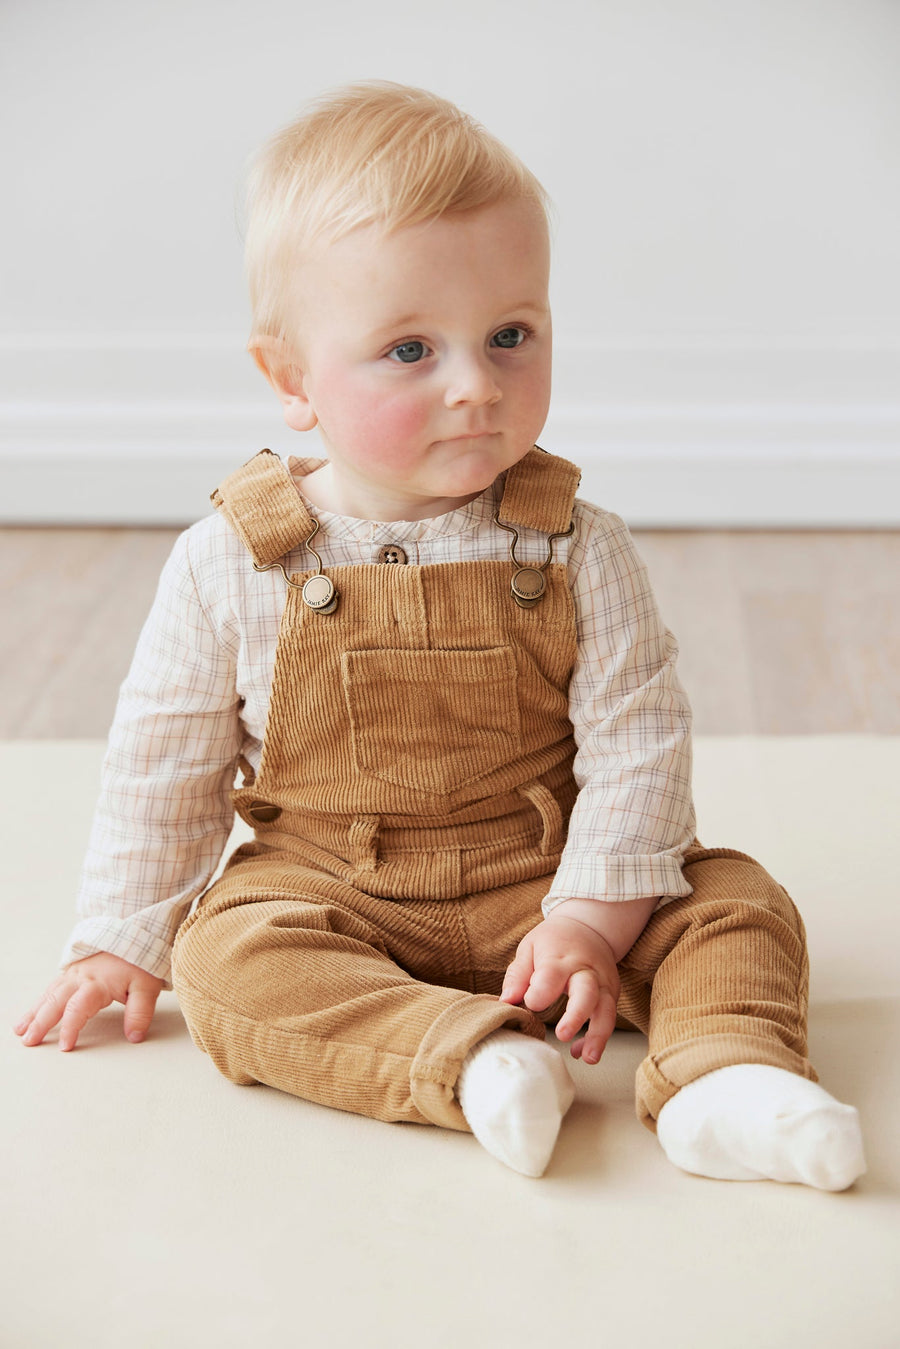 Organic Cotton Louis Top - Billy Check Childrens Top from Jamie Kay USA